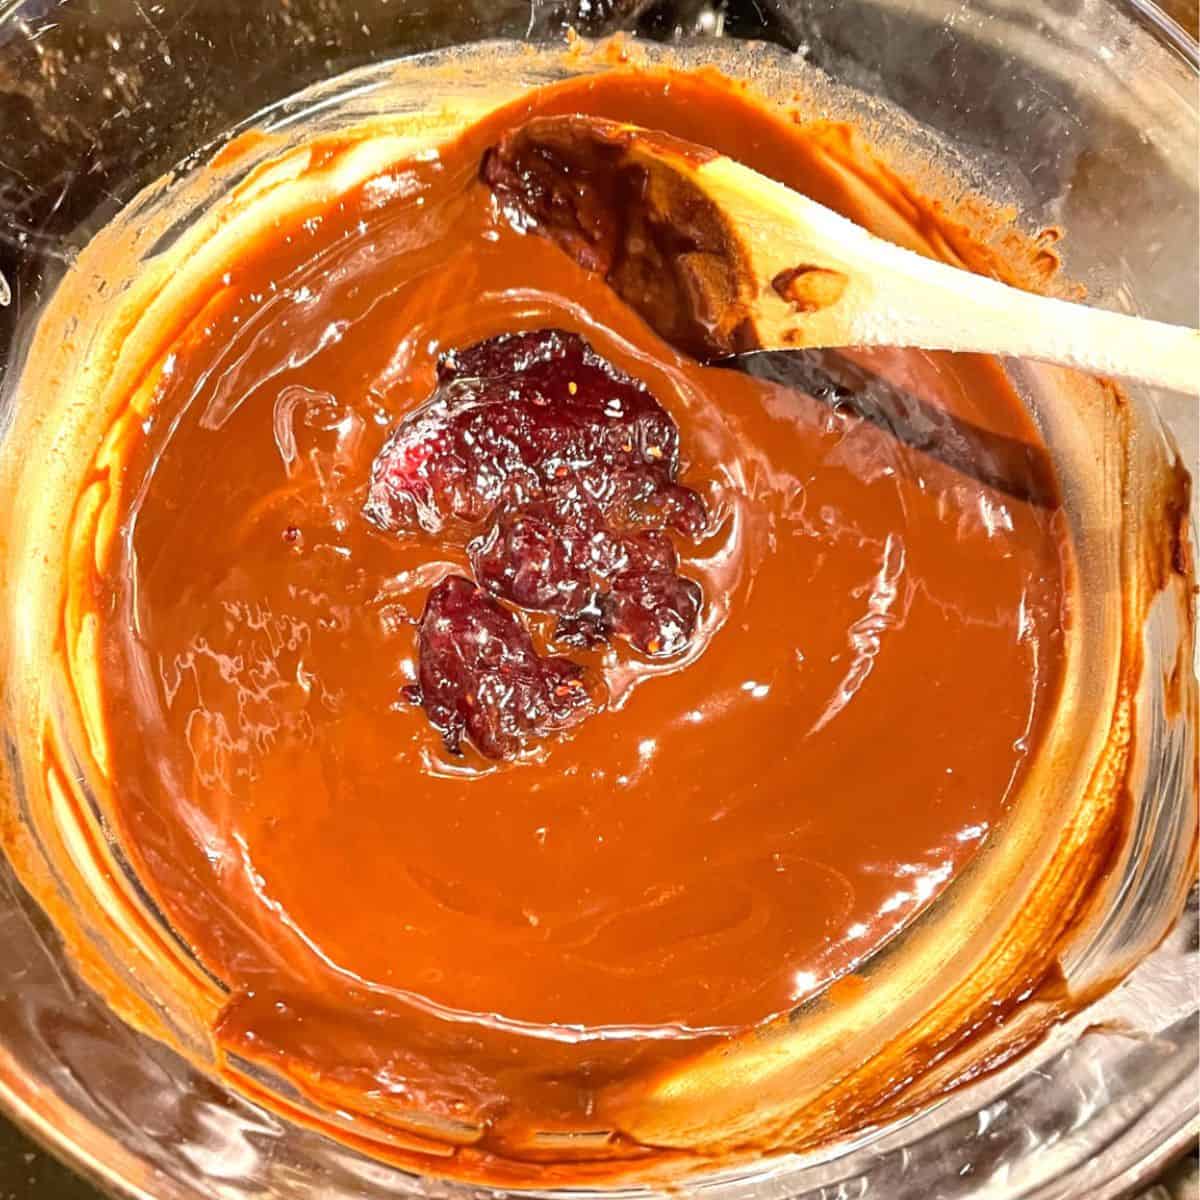 Raspberry jam added to melted chocolate in double boiler.